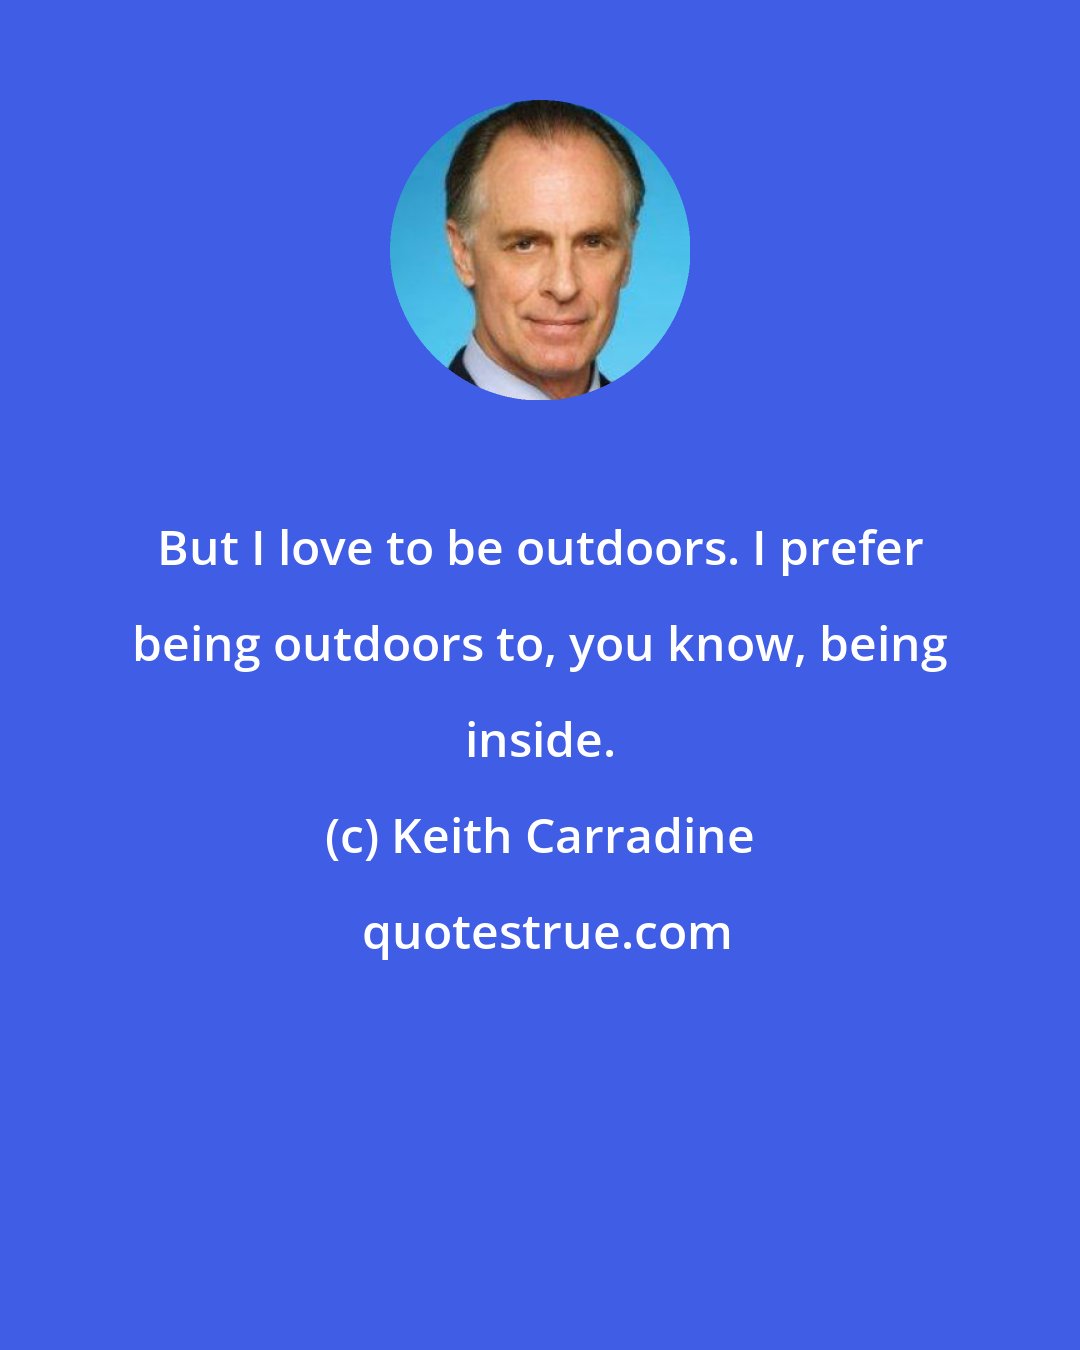 Keith Carradine: But I love to be outdoors. I prefer being outdoors to, you know, being inside.